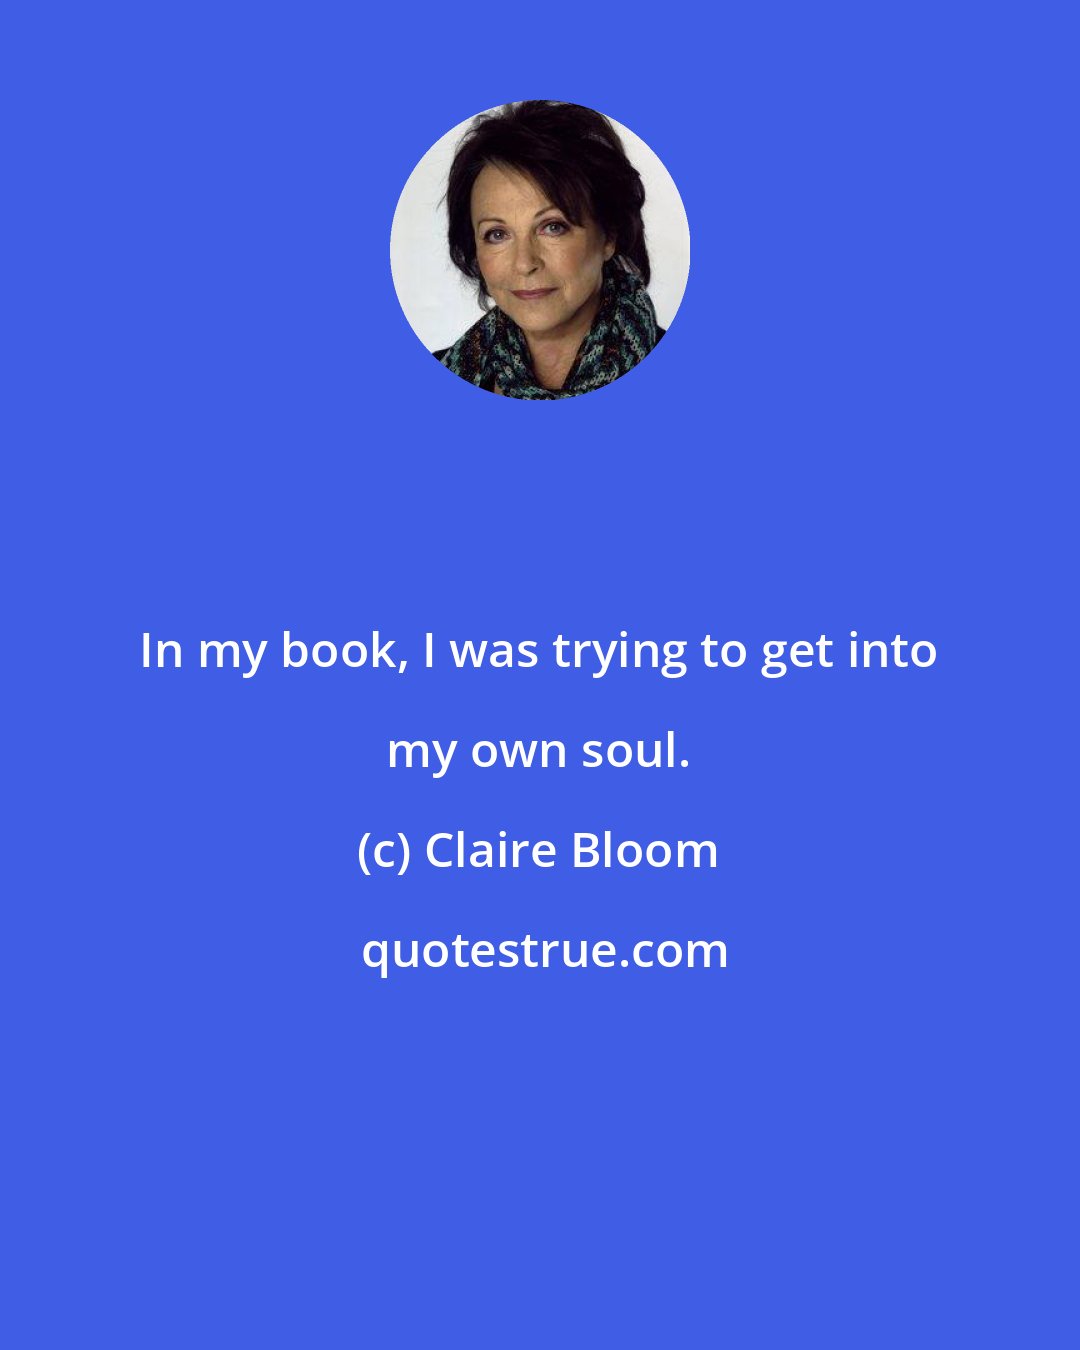 Claire Bloom: In my book, I was trying to get into my own soul.